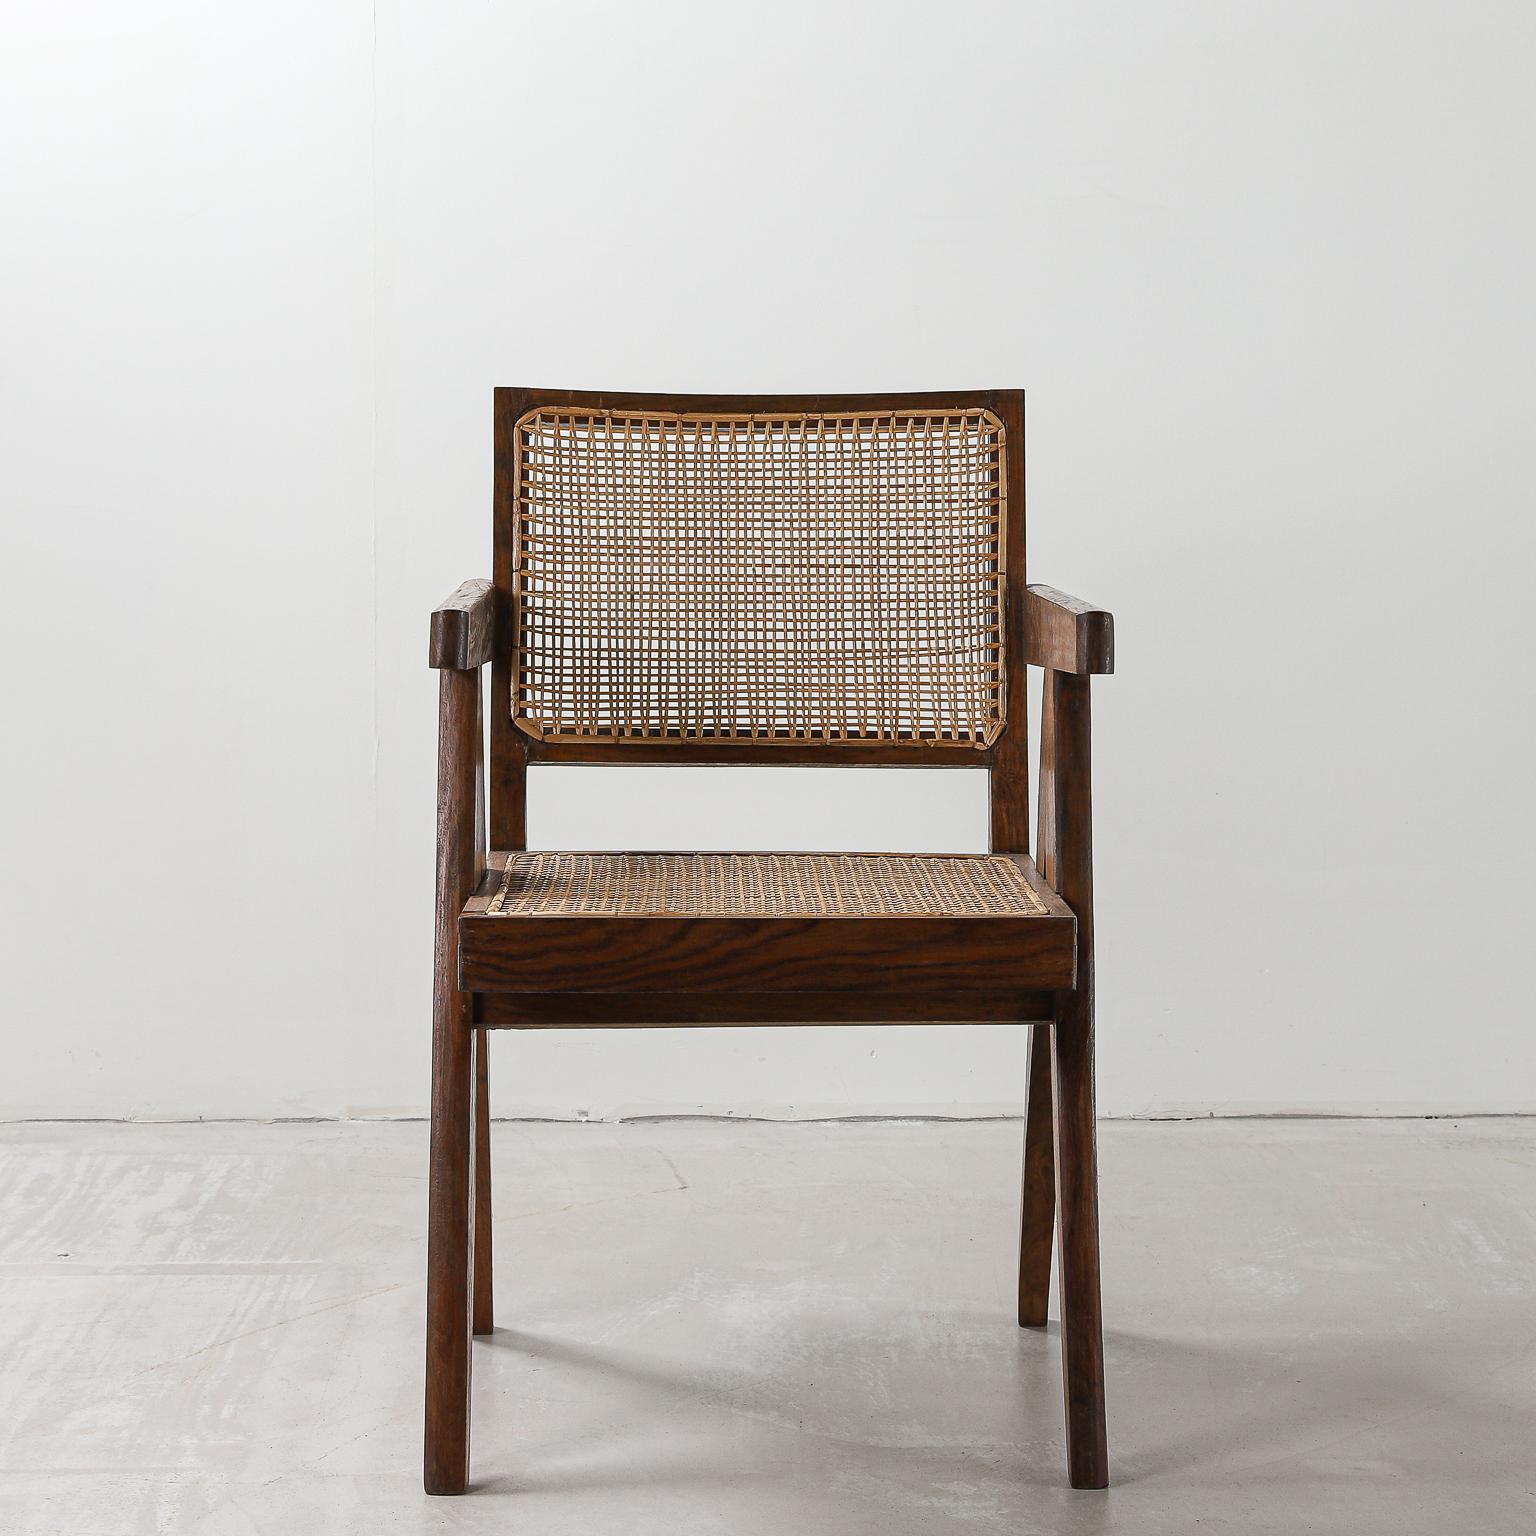 Indian Pair of Pierre Jeanneret Office Chair, Variant, circa 1953-1954